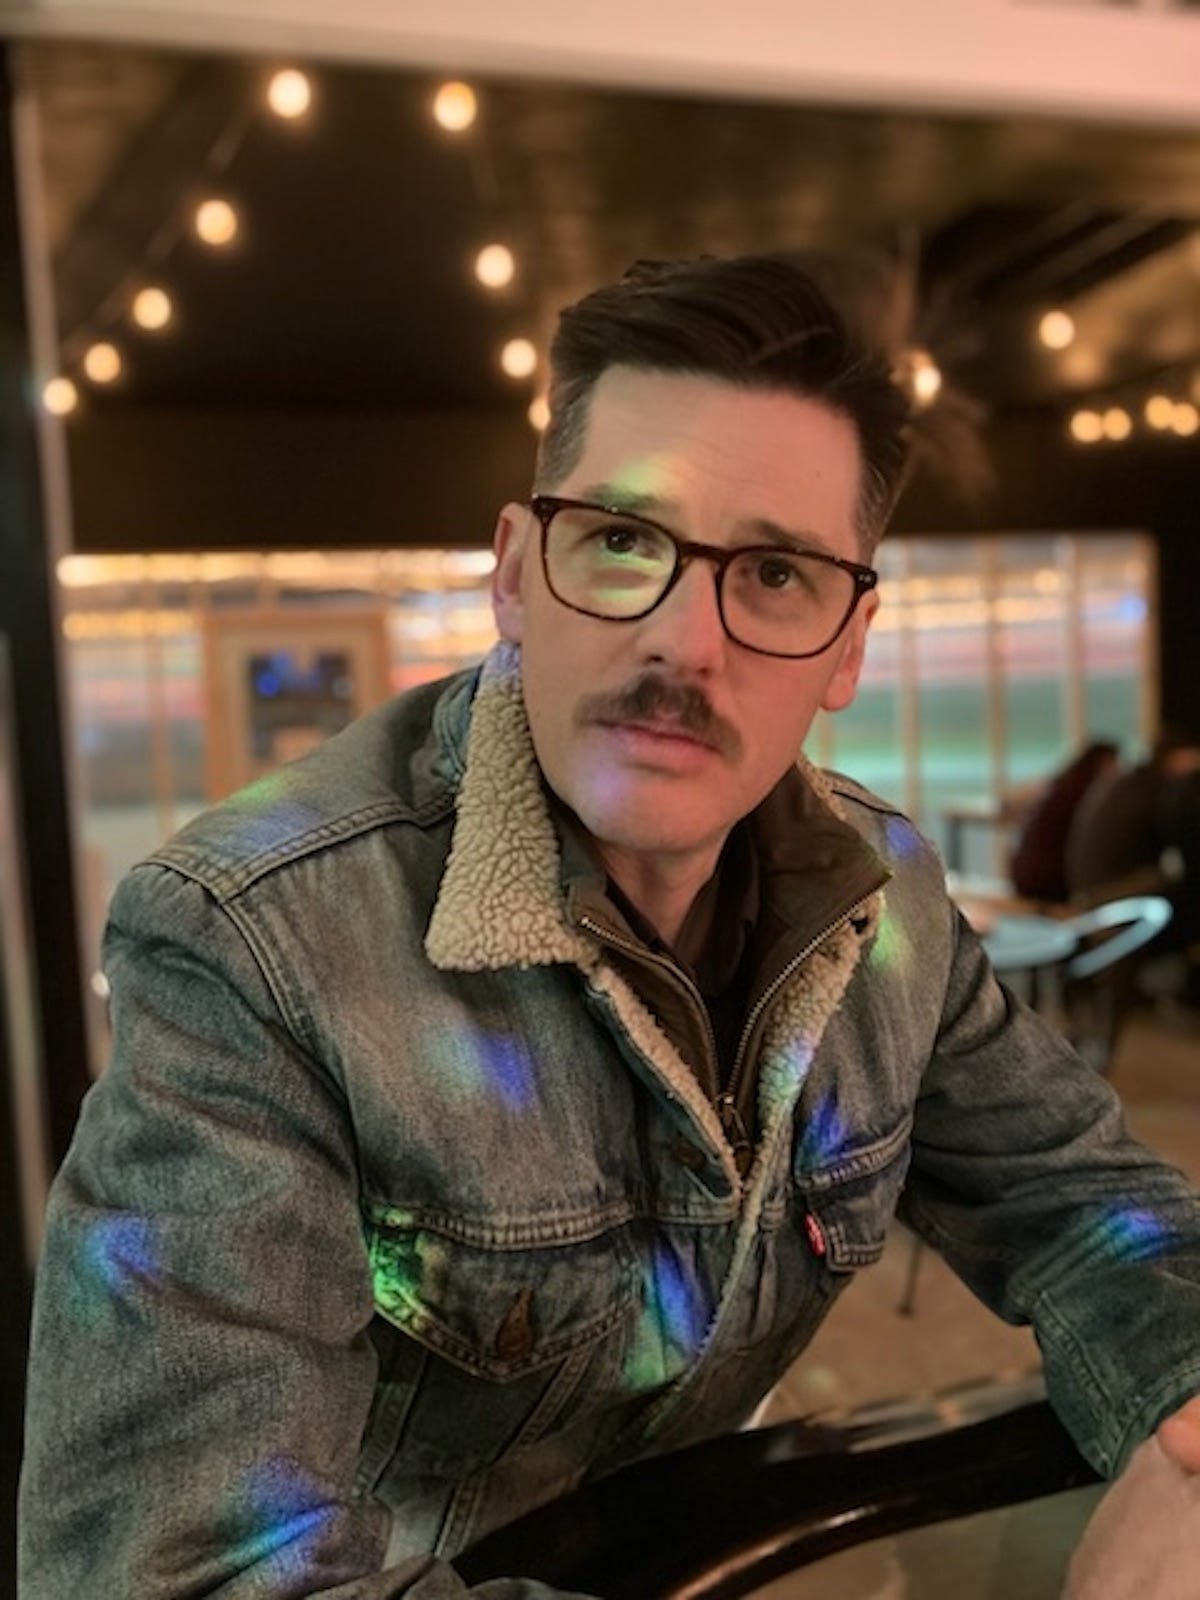 Author Andrew Ewell looks at the camera while sitting in a restaurant. Ewell has a tight, cropped haircut, a pair of black glasses and a mustache. He's wearing a jean jacket. 